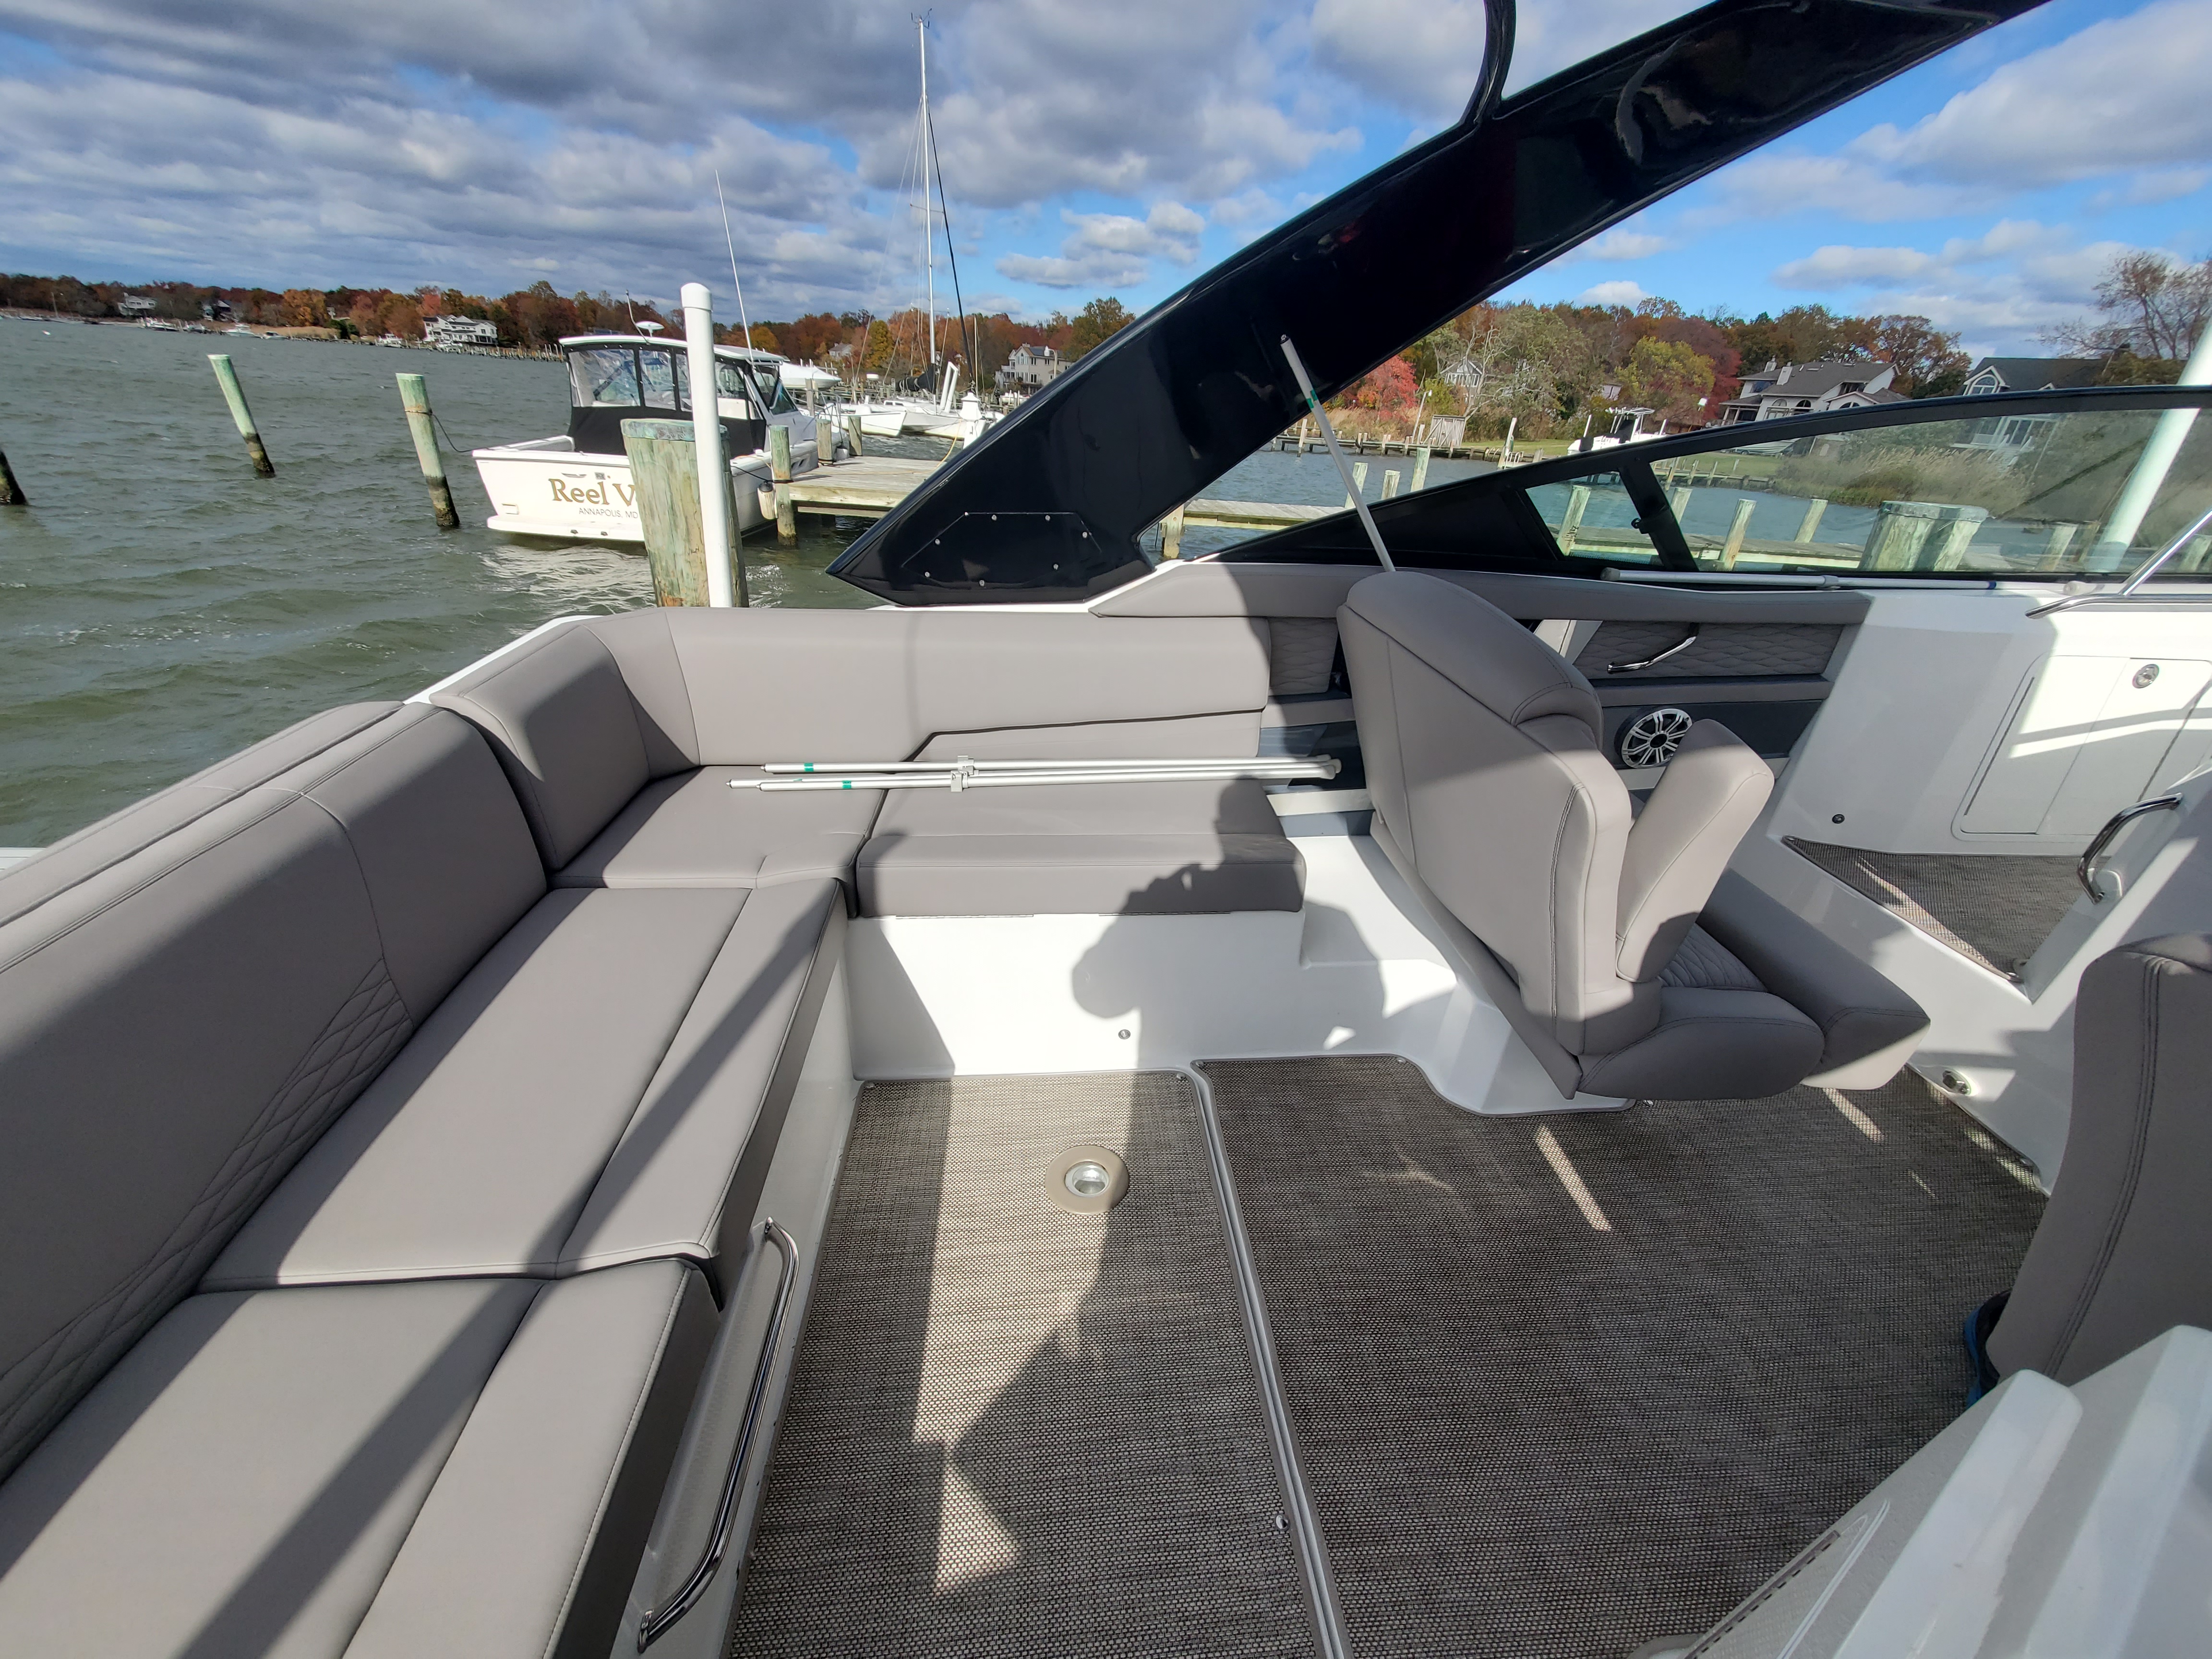 4th Quarter Yacht Brokers Of Annapolis